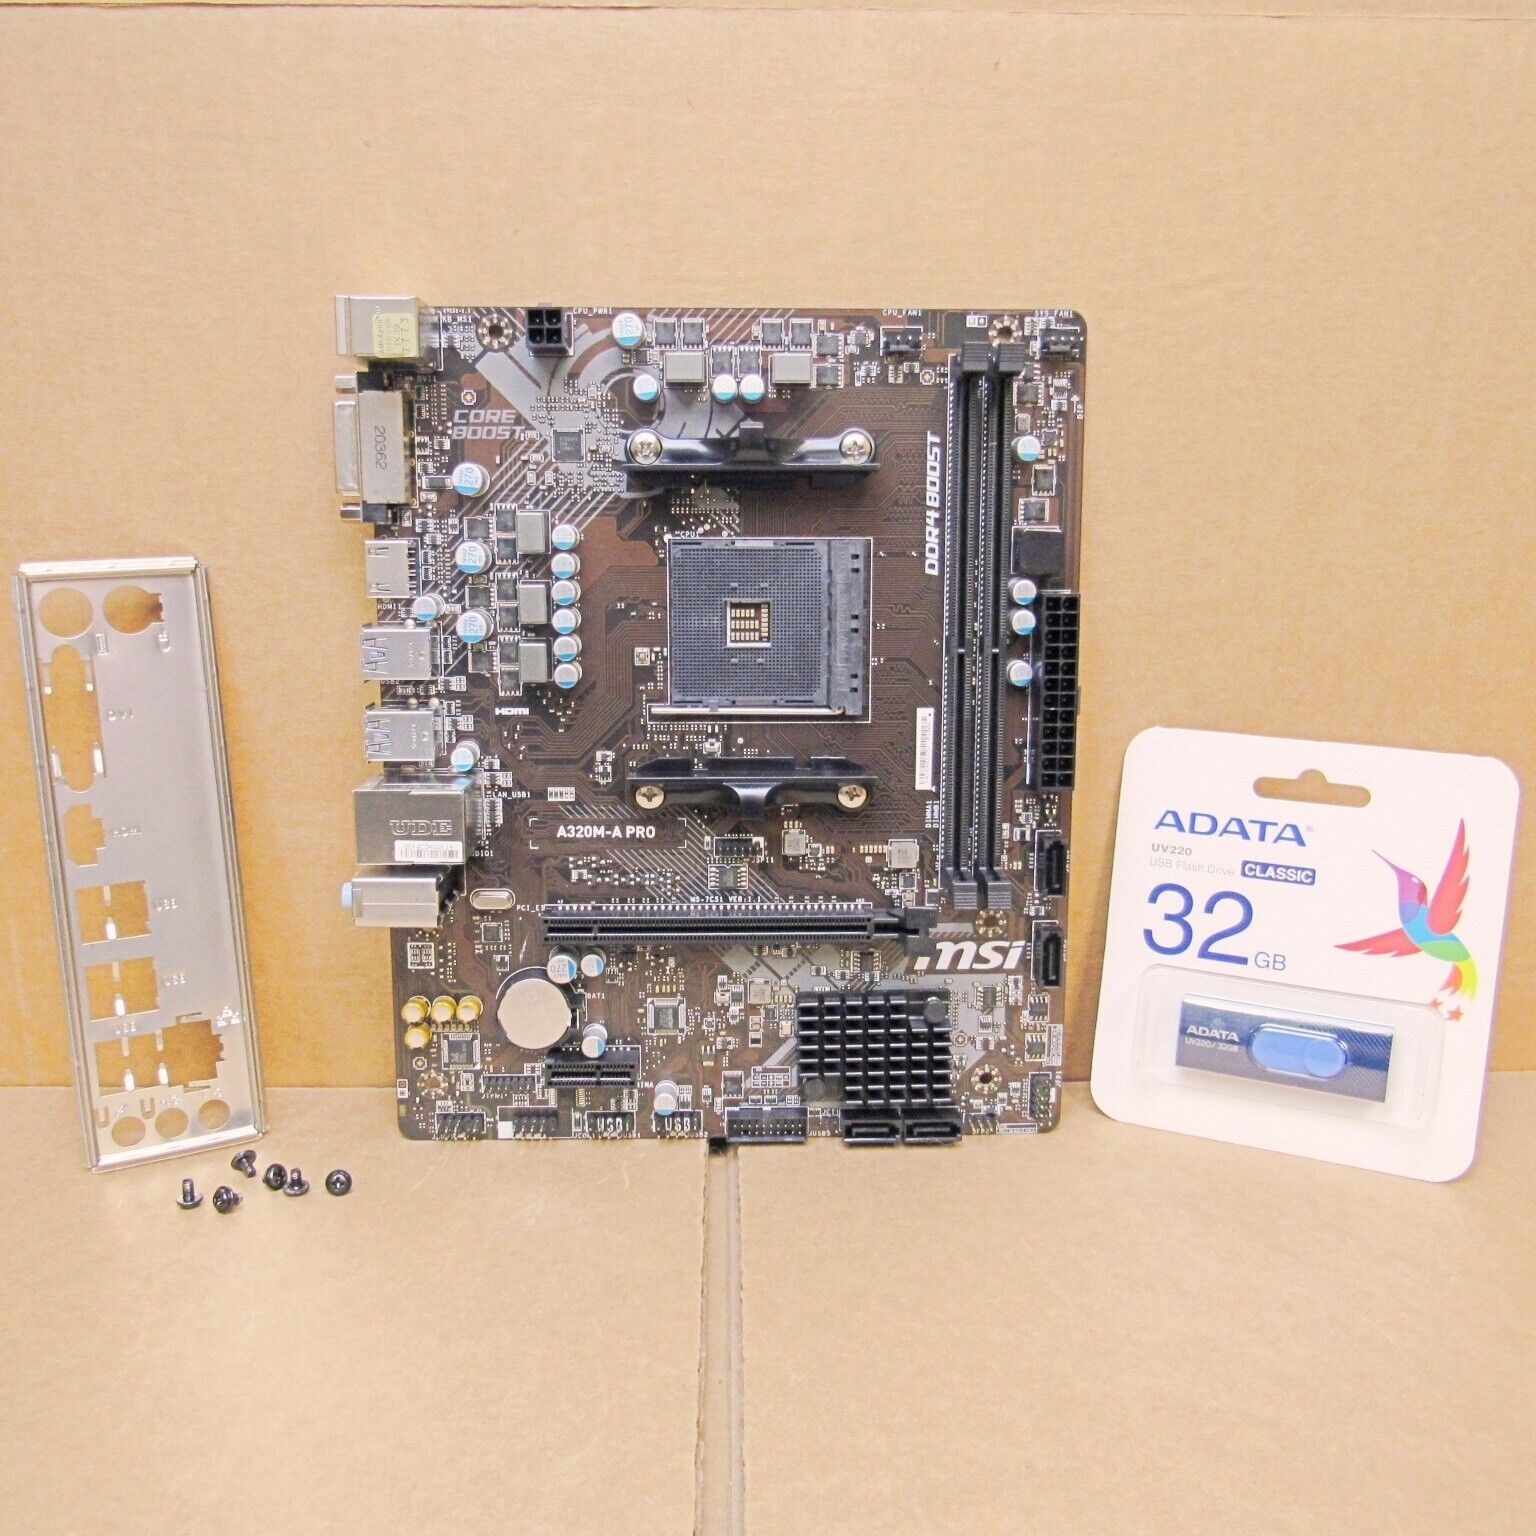 New MSI A320M-A PRO Motherboard w/AM4 and Micro ATX...Windows 10 Home Available